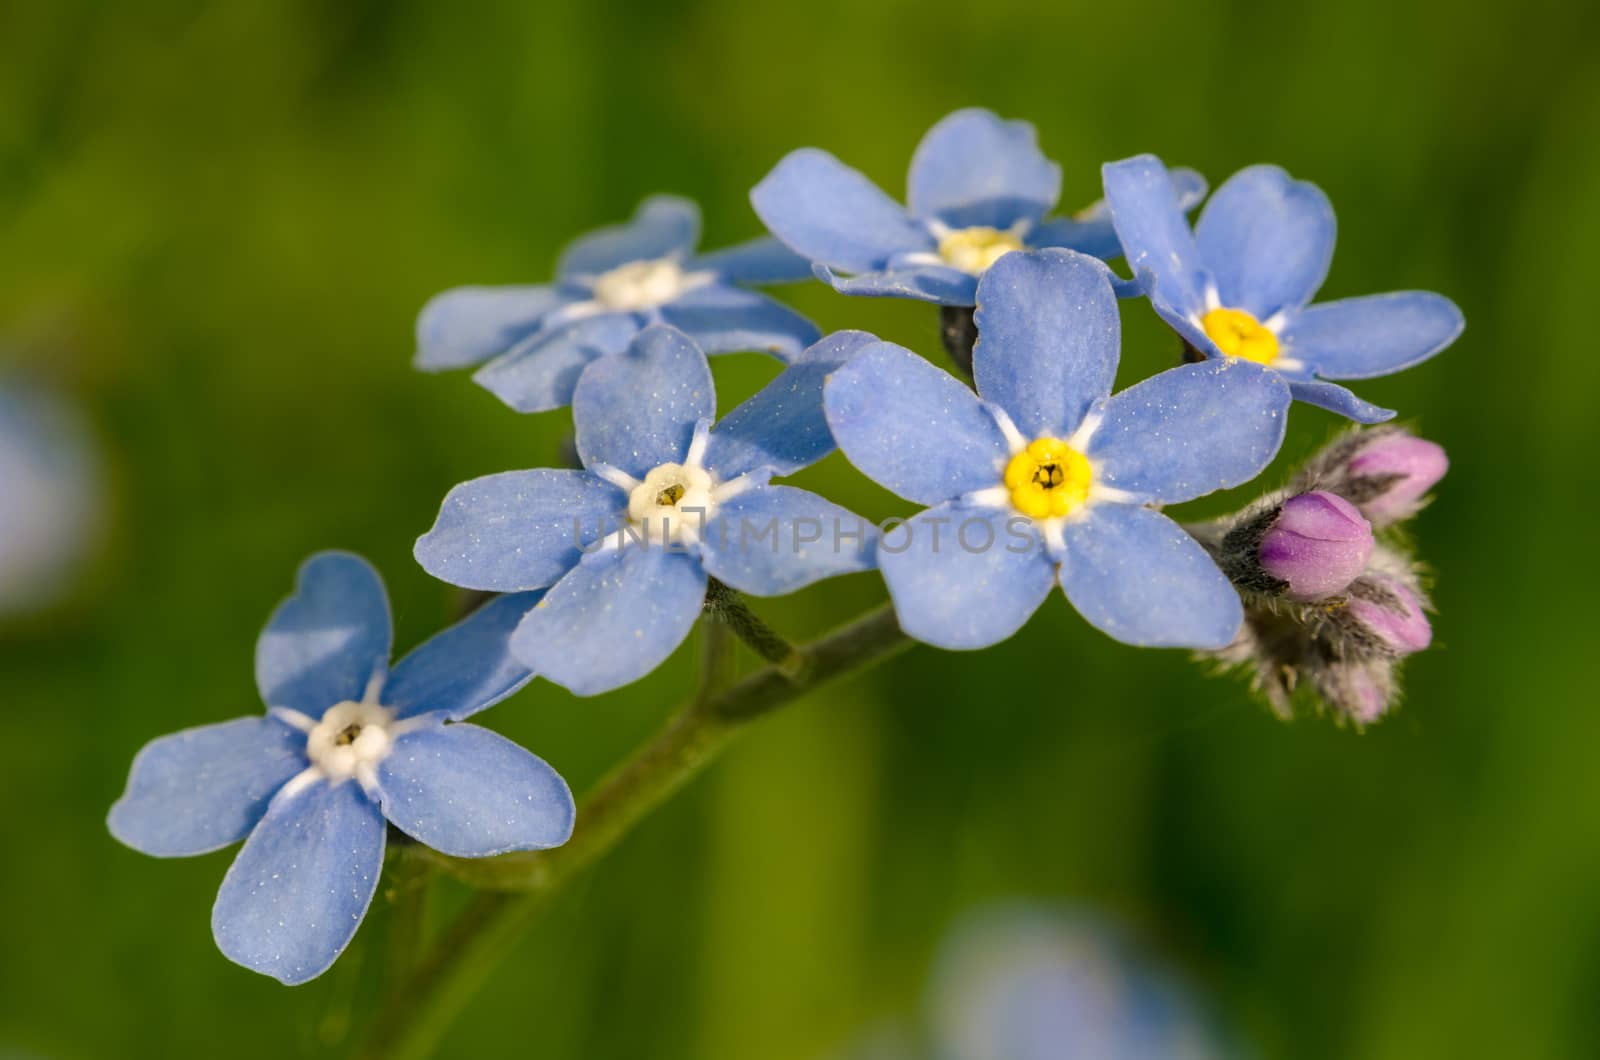 Forget-me-not-flower in the spring by ganchar